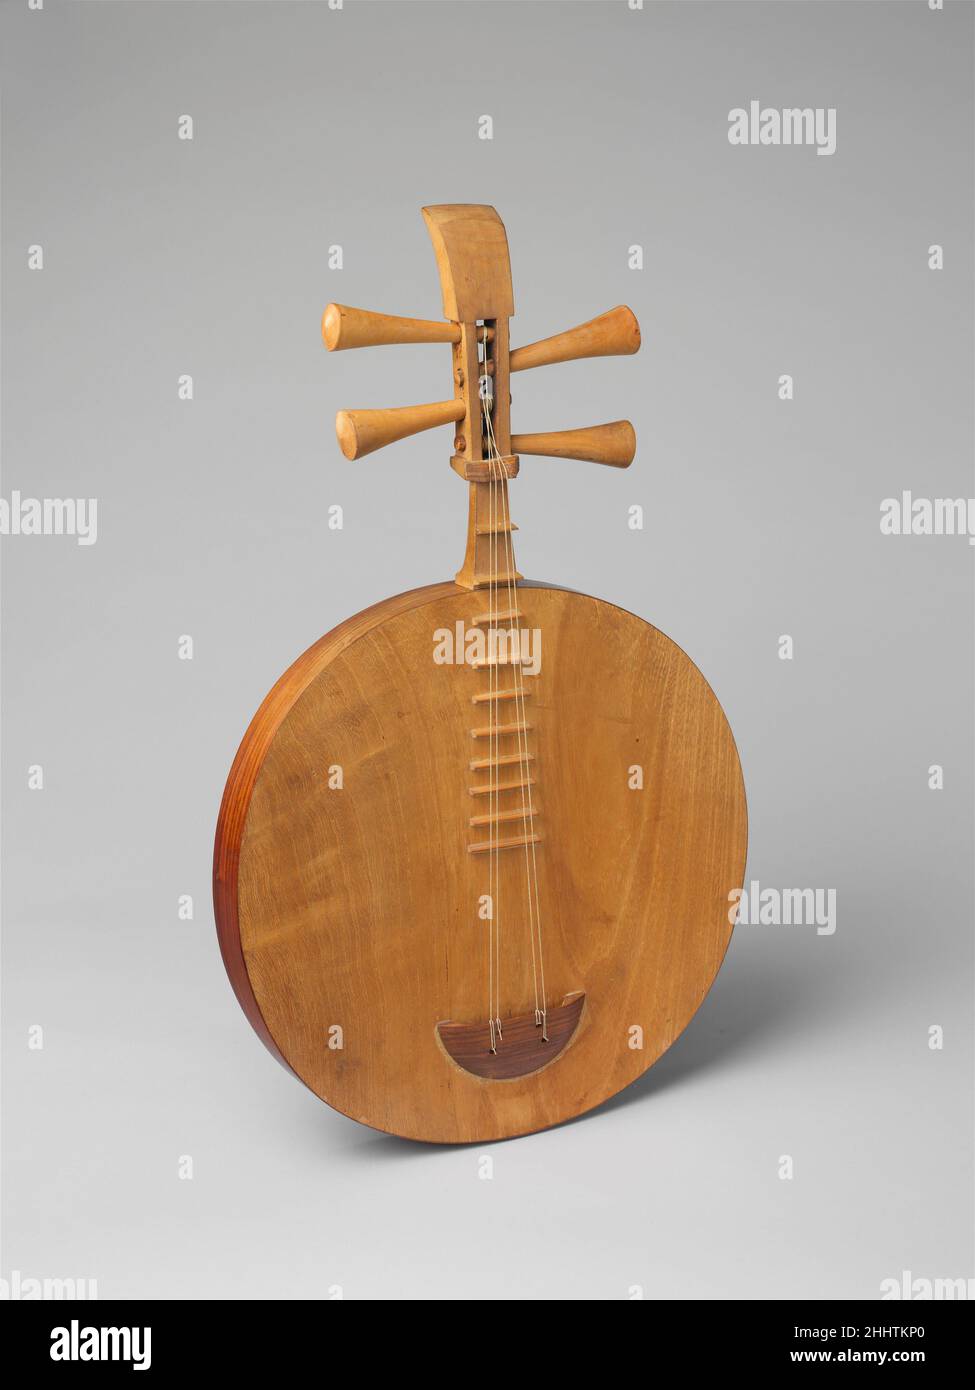 Yueqin (月琴) 19th century Chinese The resemblance of this round lute to the full moon (yue) gave it its name. The yueqin developed from a much larger long-necked lute that appeared in the Qin and Han dynasties. Its four strings are tuned in pairs, a fifth apart. Like the sanxian, it encloses a vibrating plate. Found in popular ensembles and the Beijing opera and used to accompany song, the yueqin has not been fully embraced by the modern Chinese orchestra. The player presses the strings between the high frets making chord playing difficult but giving increased control over the timbre and intona Stock Photo